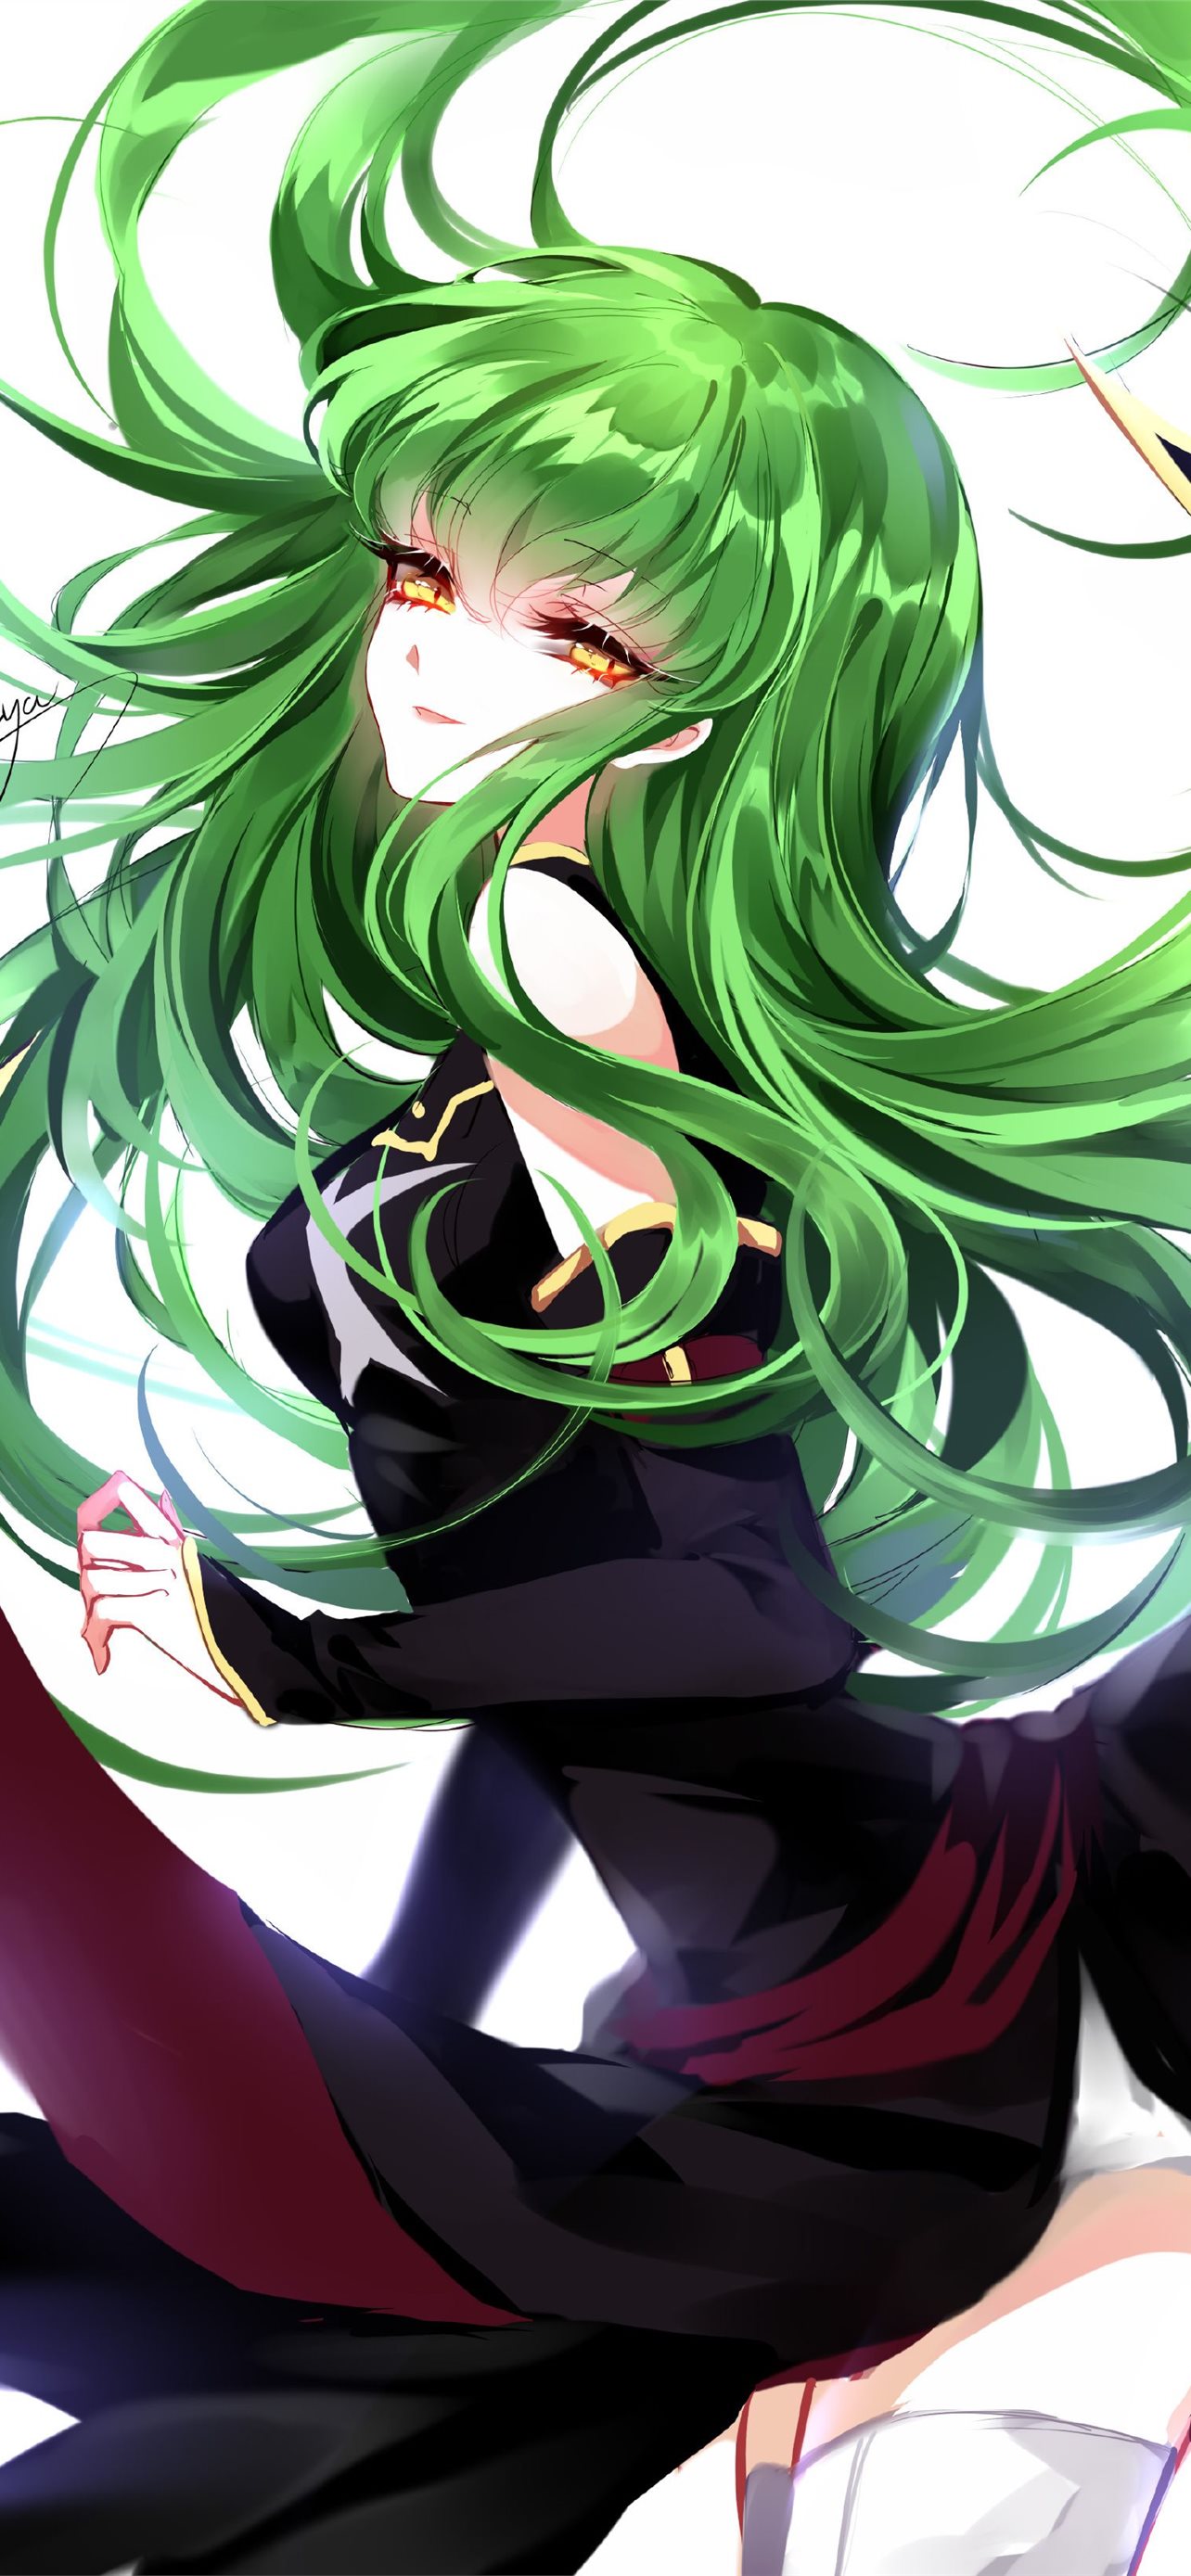 460 CC Code Geass HD Wallpapers and Backgrounds